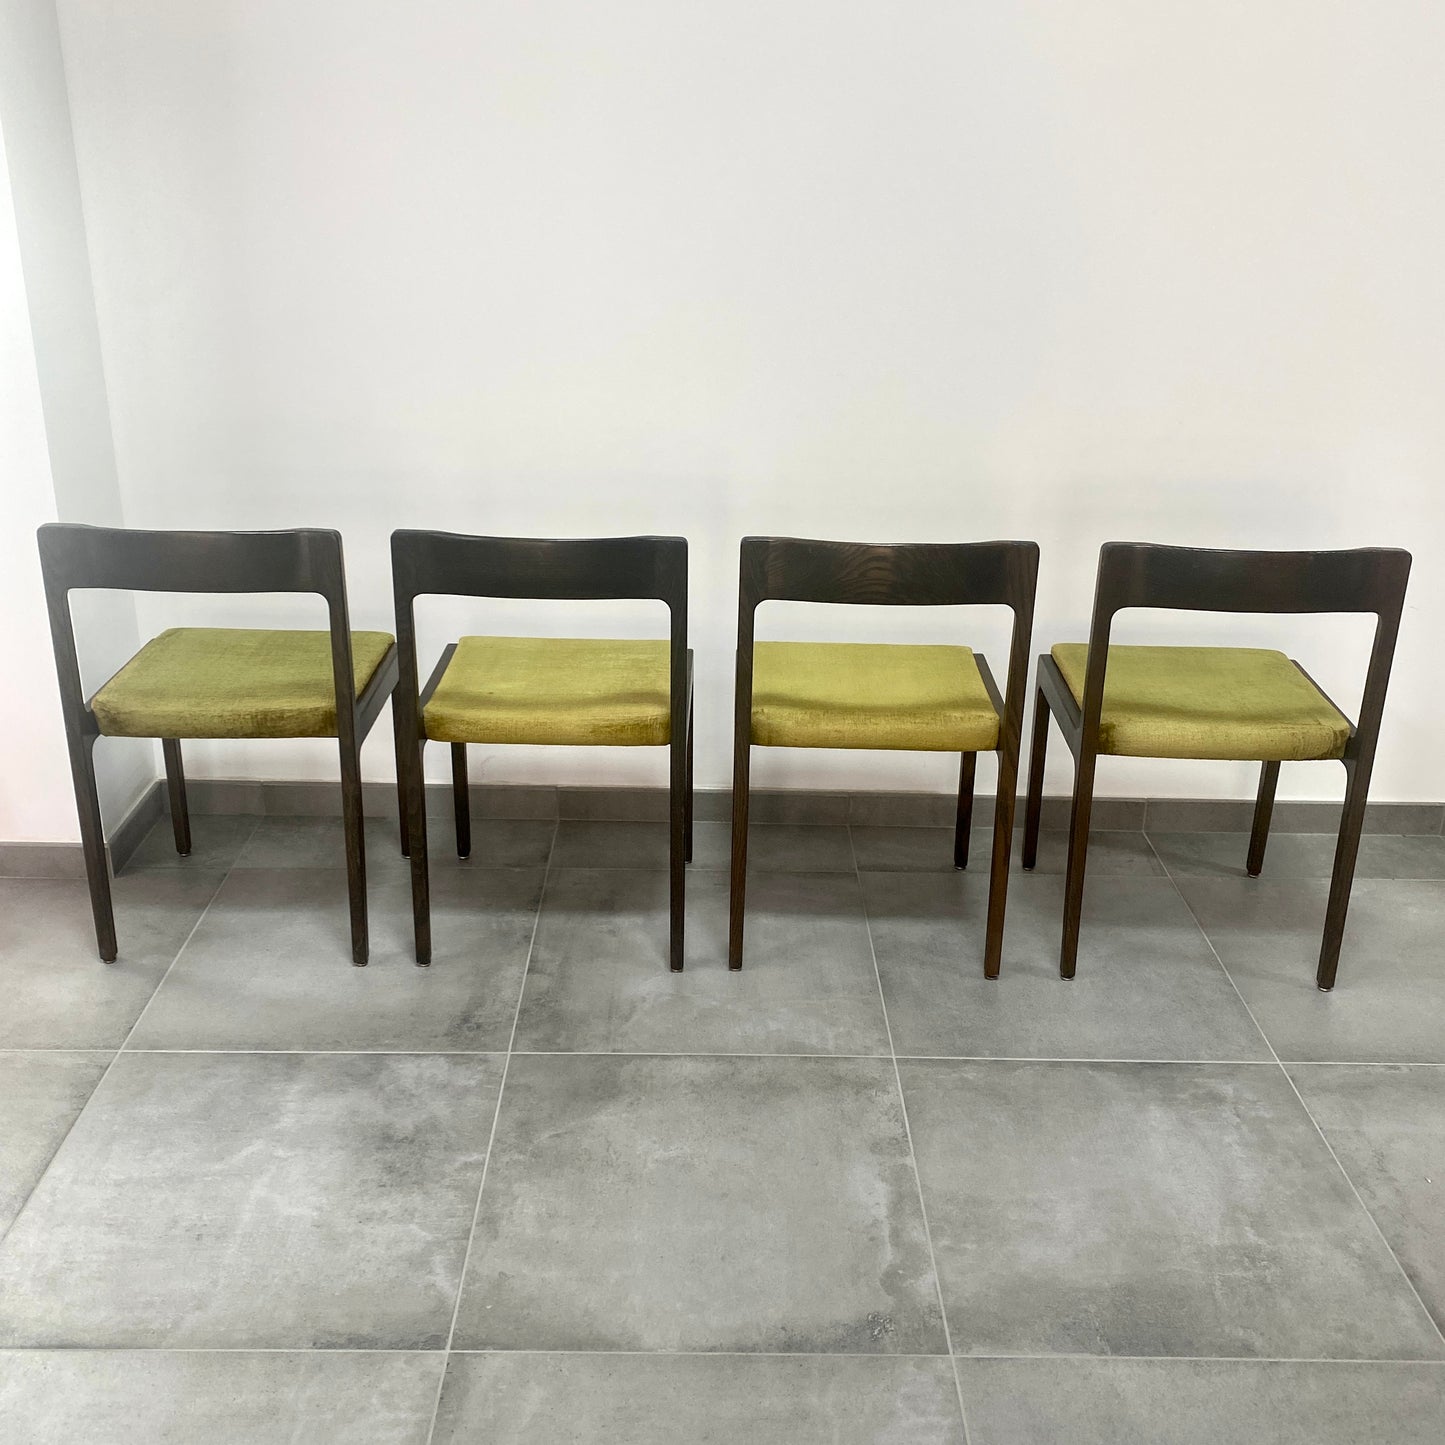 4 chaises scandinaves vintage